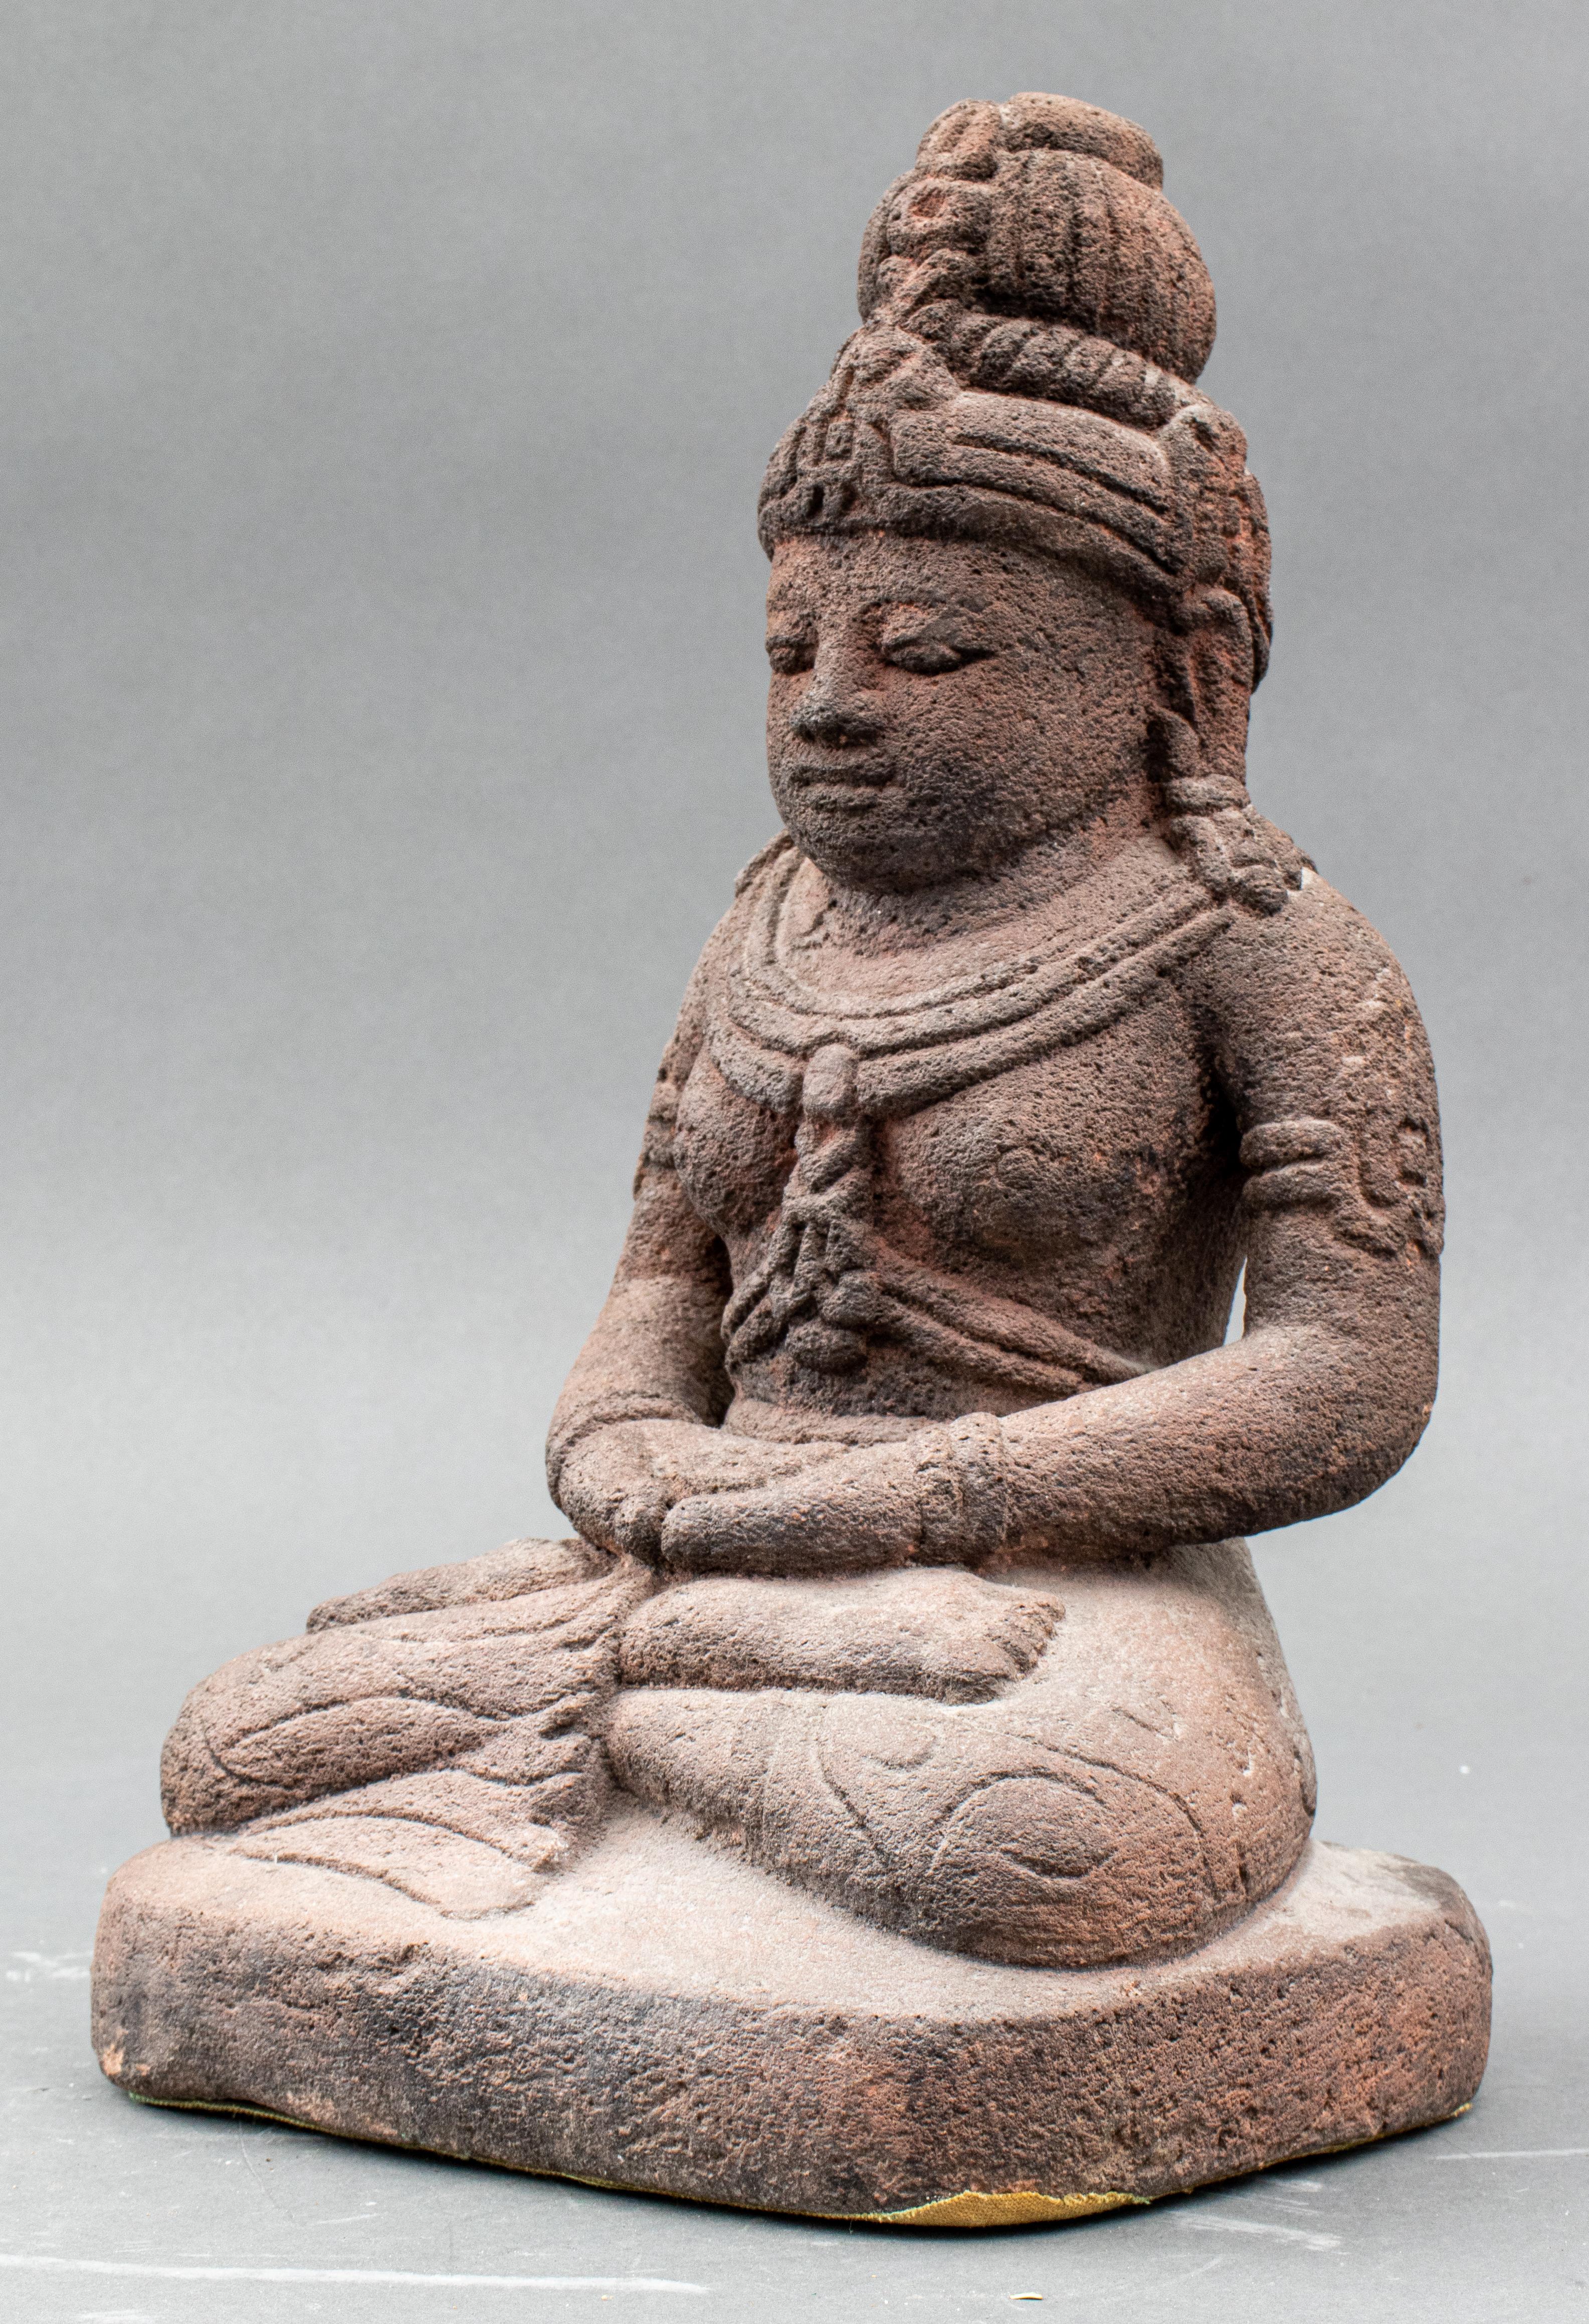 Indonesian andesite figure depicting a seated bodhisattva in lotus position / padmasana wearing armbands, earrings, bracelets, necklaces, pants with carved scrolling design, and a headdress, Java, 16th century or later. 
Measures: 15.5